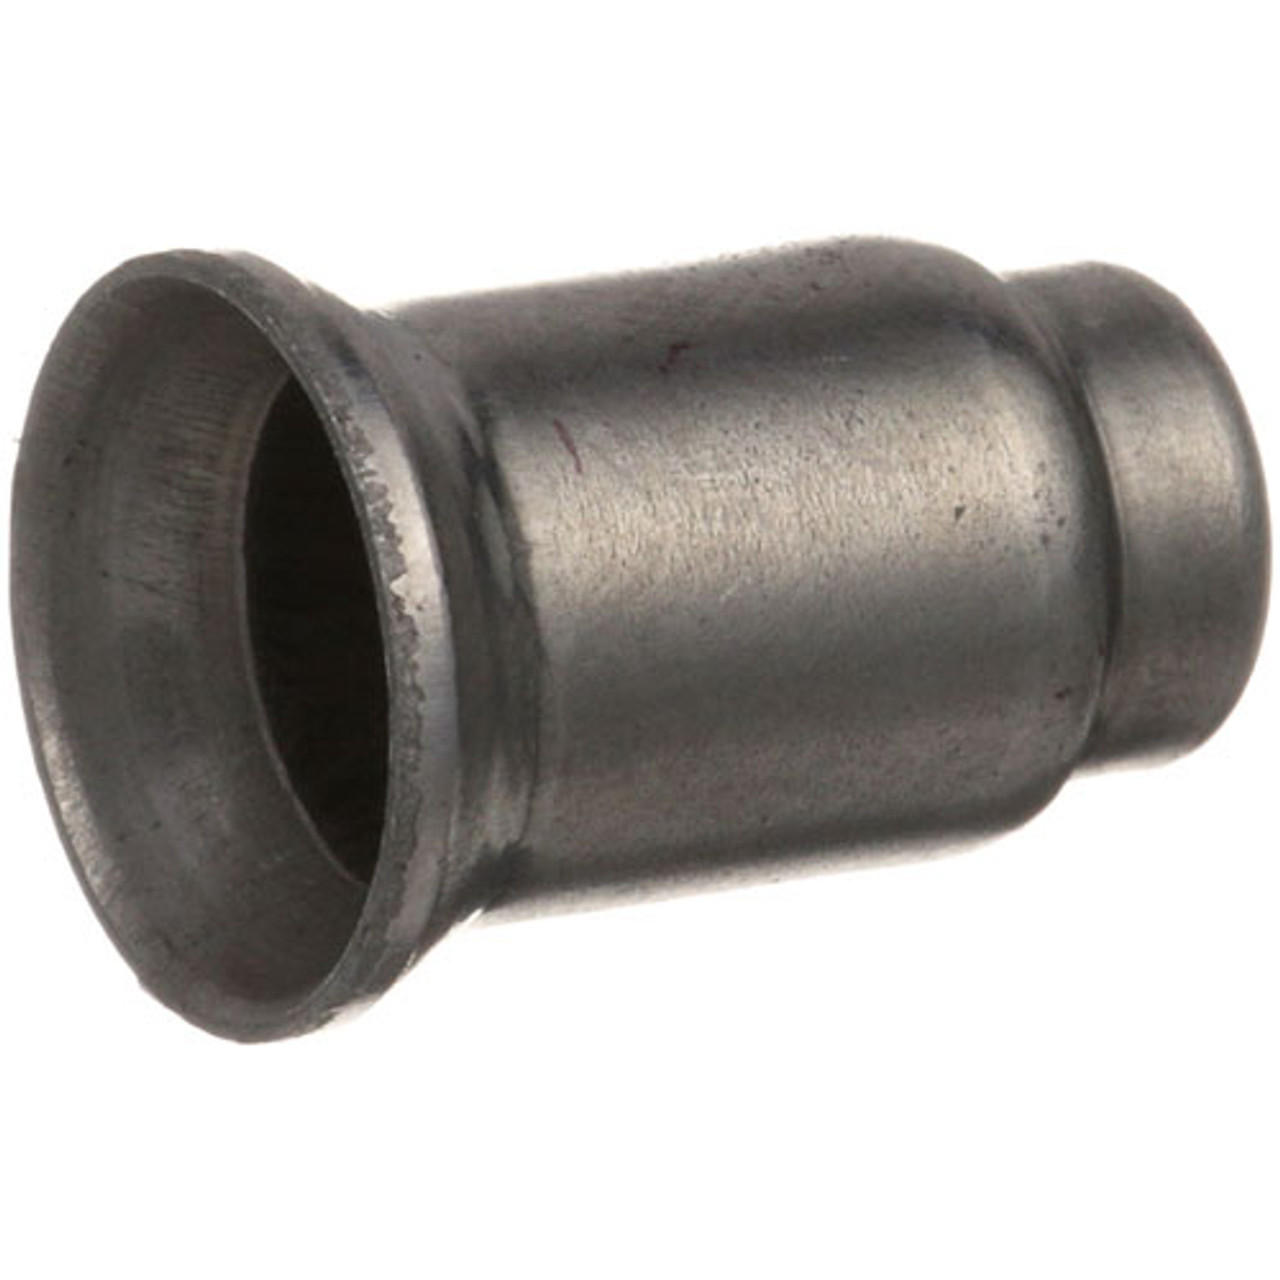 Pilot Orifice .010 - Replacement Part For Star Mfg WS-65352